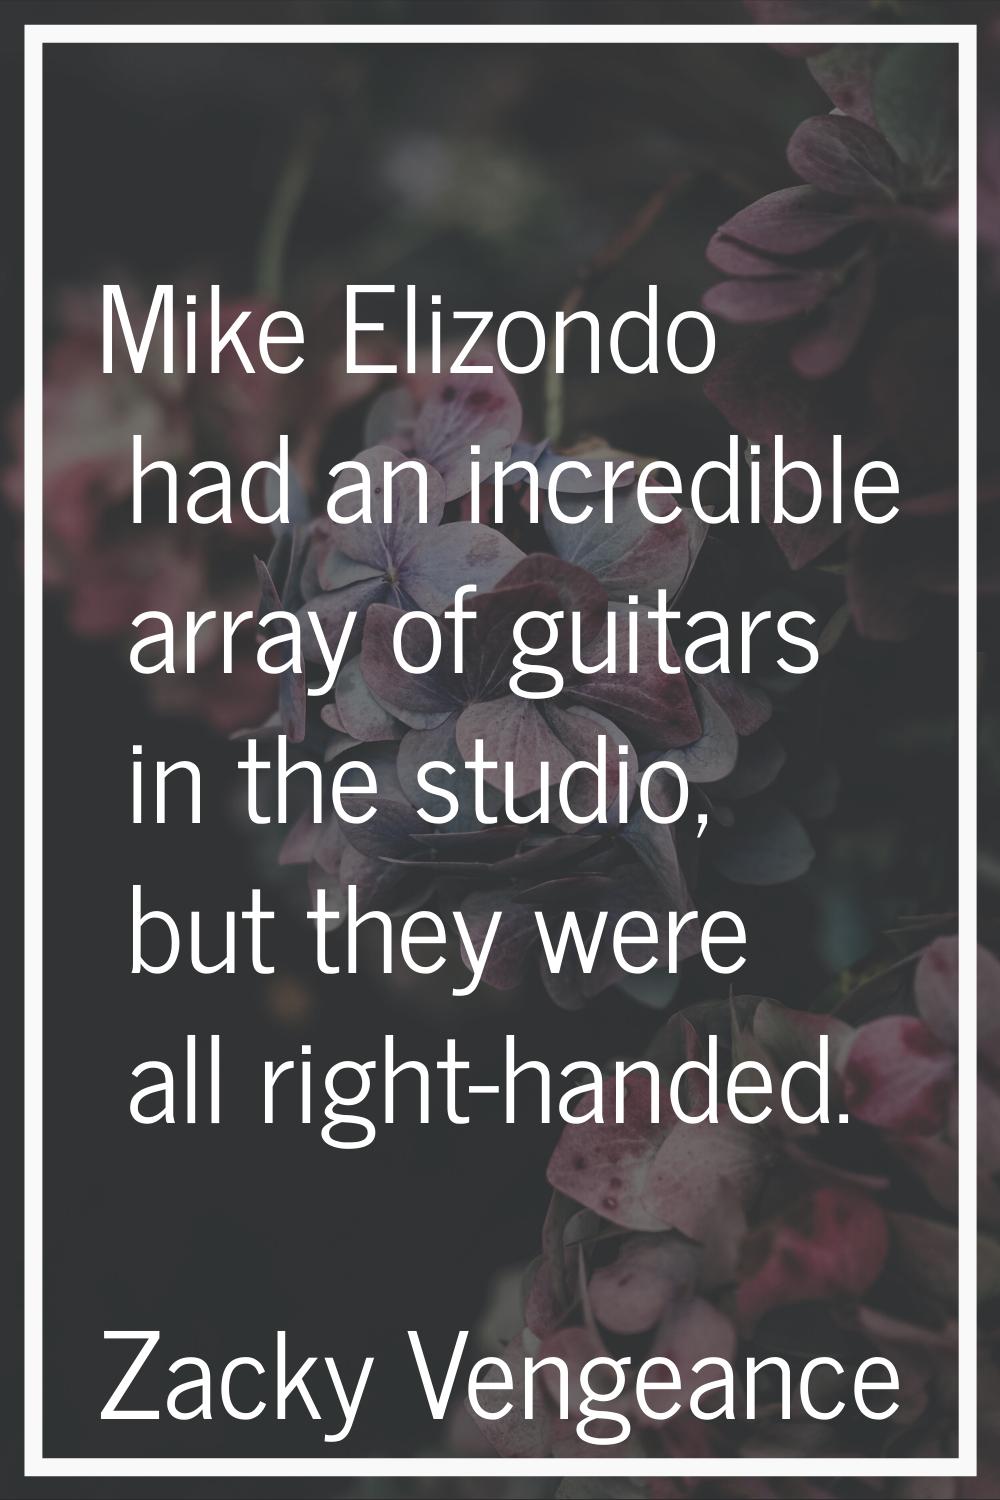 Mike Elizondo had an incredible array of guitars in the studio, but they were all right-handed.